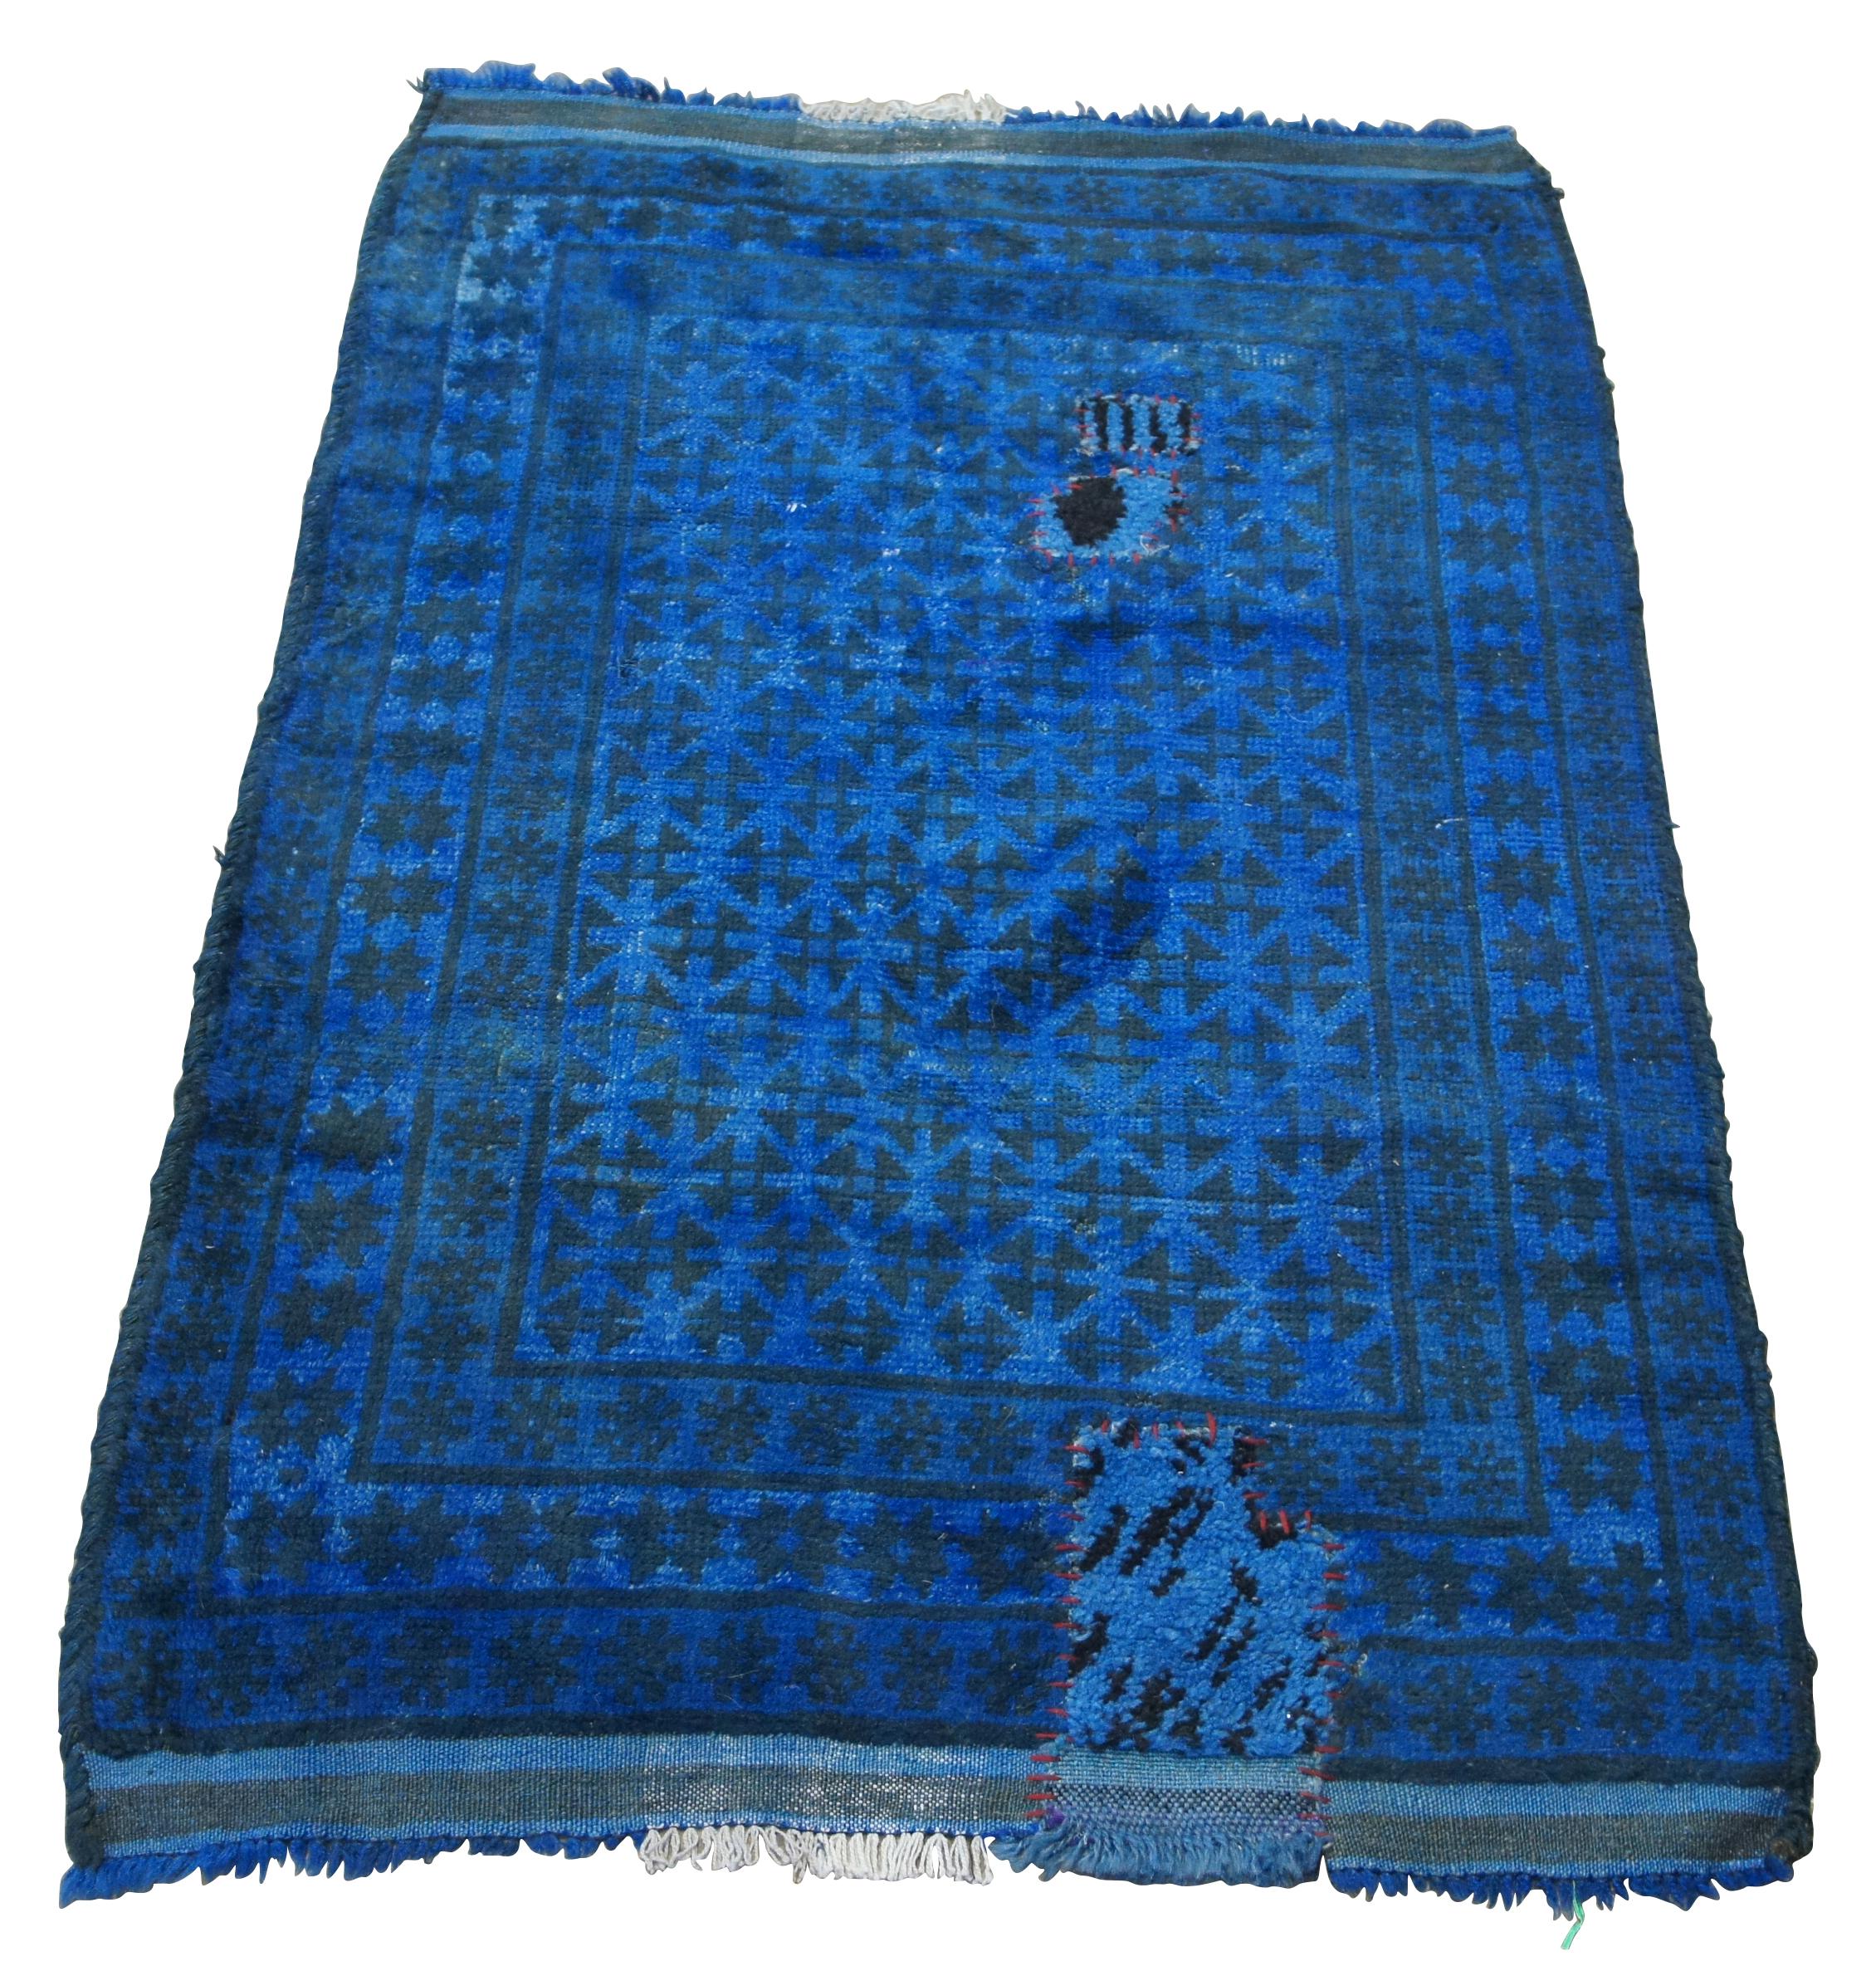 A lovely hand knotted Pakistani Balouch wool prayer rug, circa 1980s. Features a blue and black geometric pattern.

The area of Balochistan, the home of the Baluch rug (also Belouch, Balouch or Balooch), borders the south-east of Kerman on the